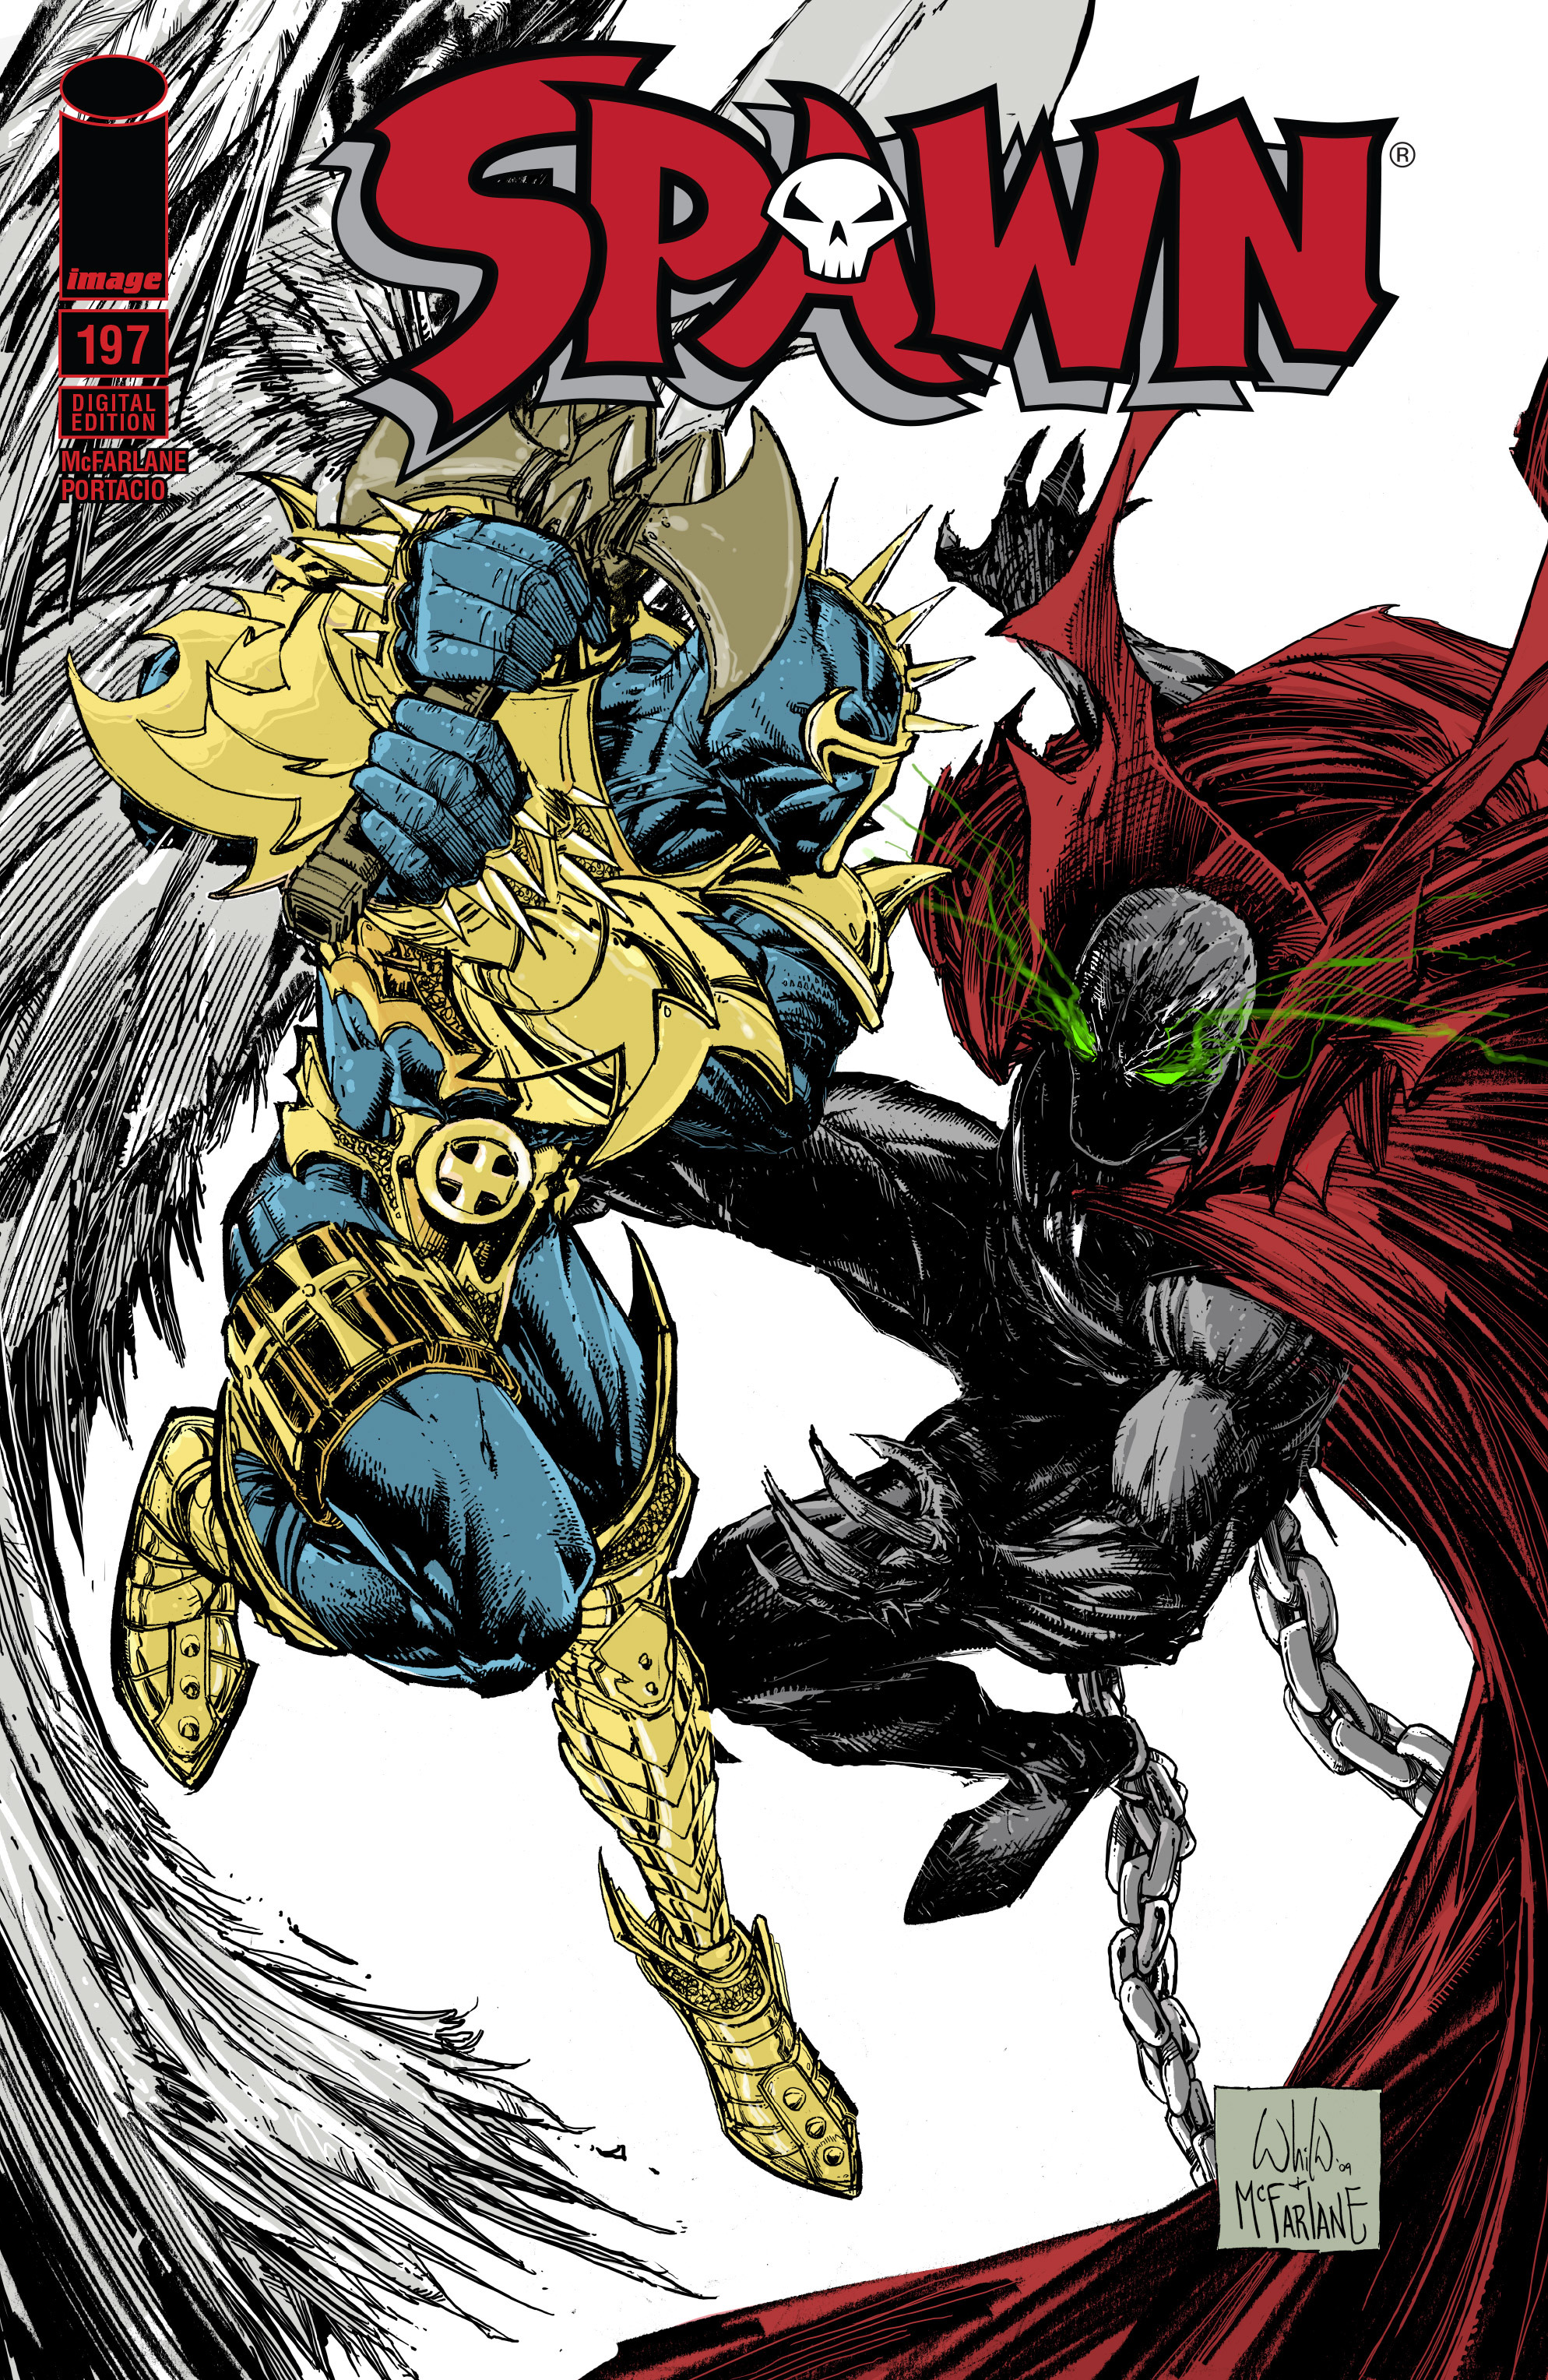 Read online Spawn comic -  Issue #197 - 1